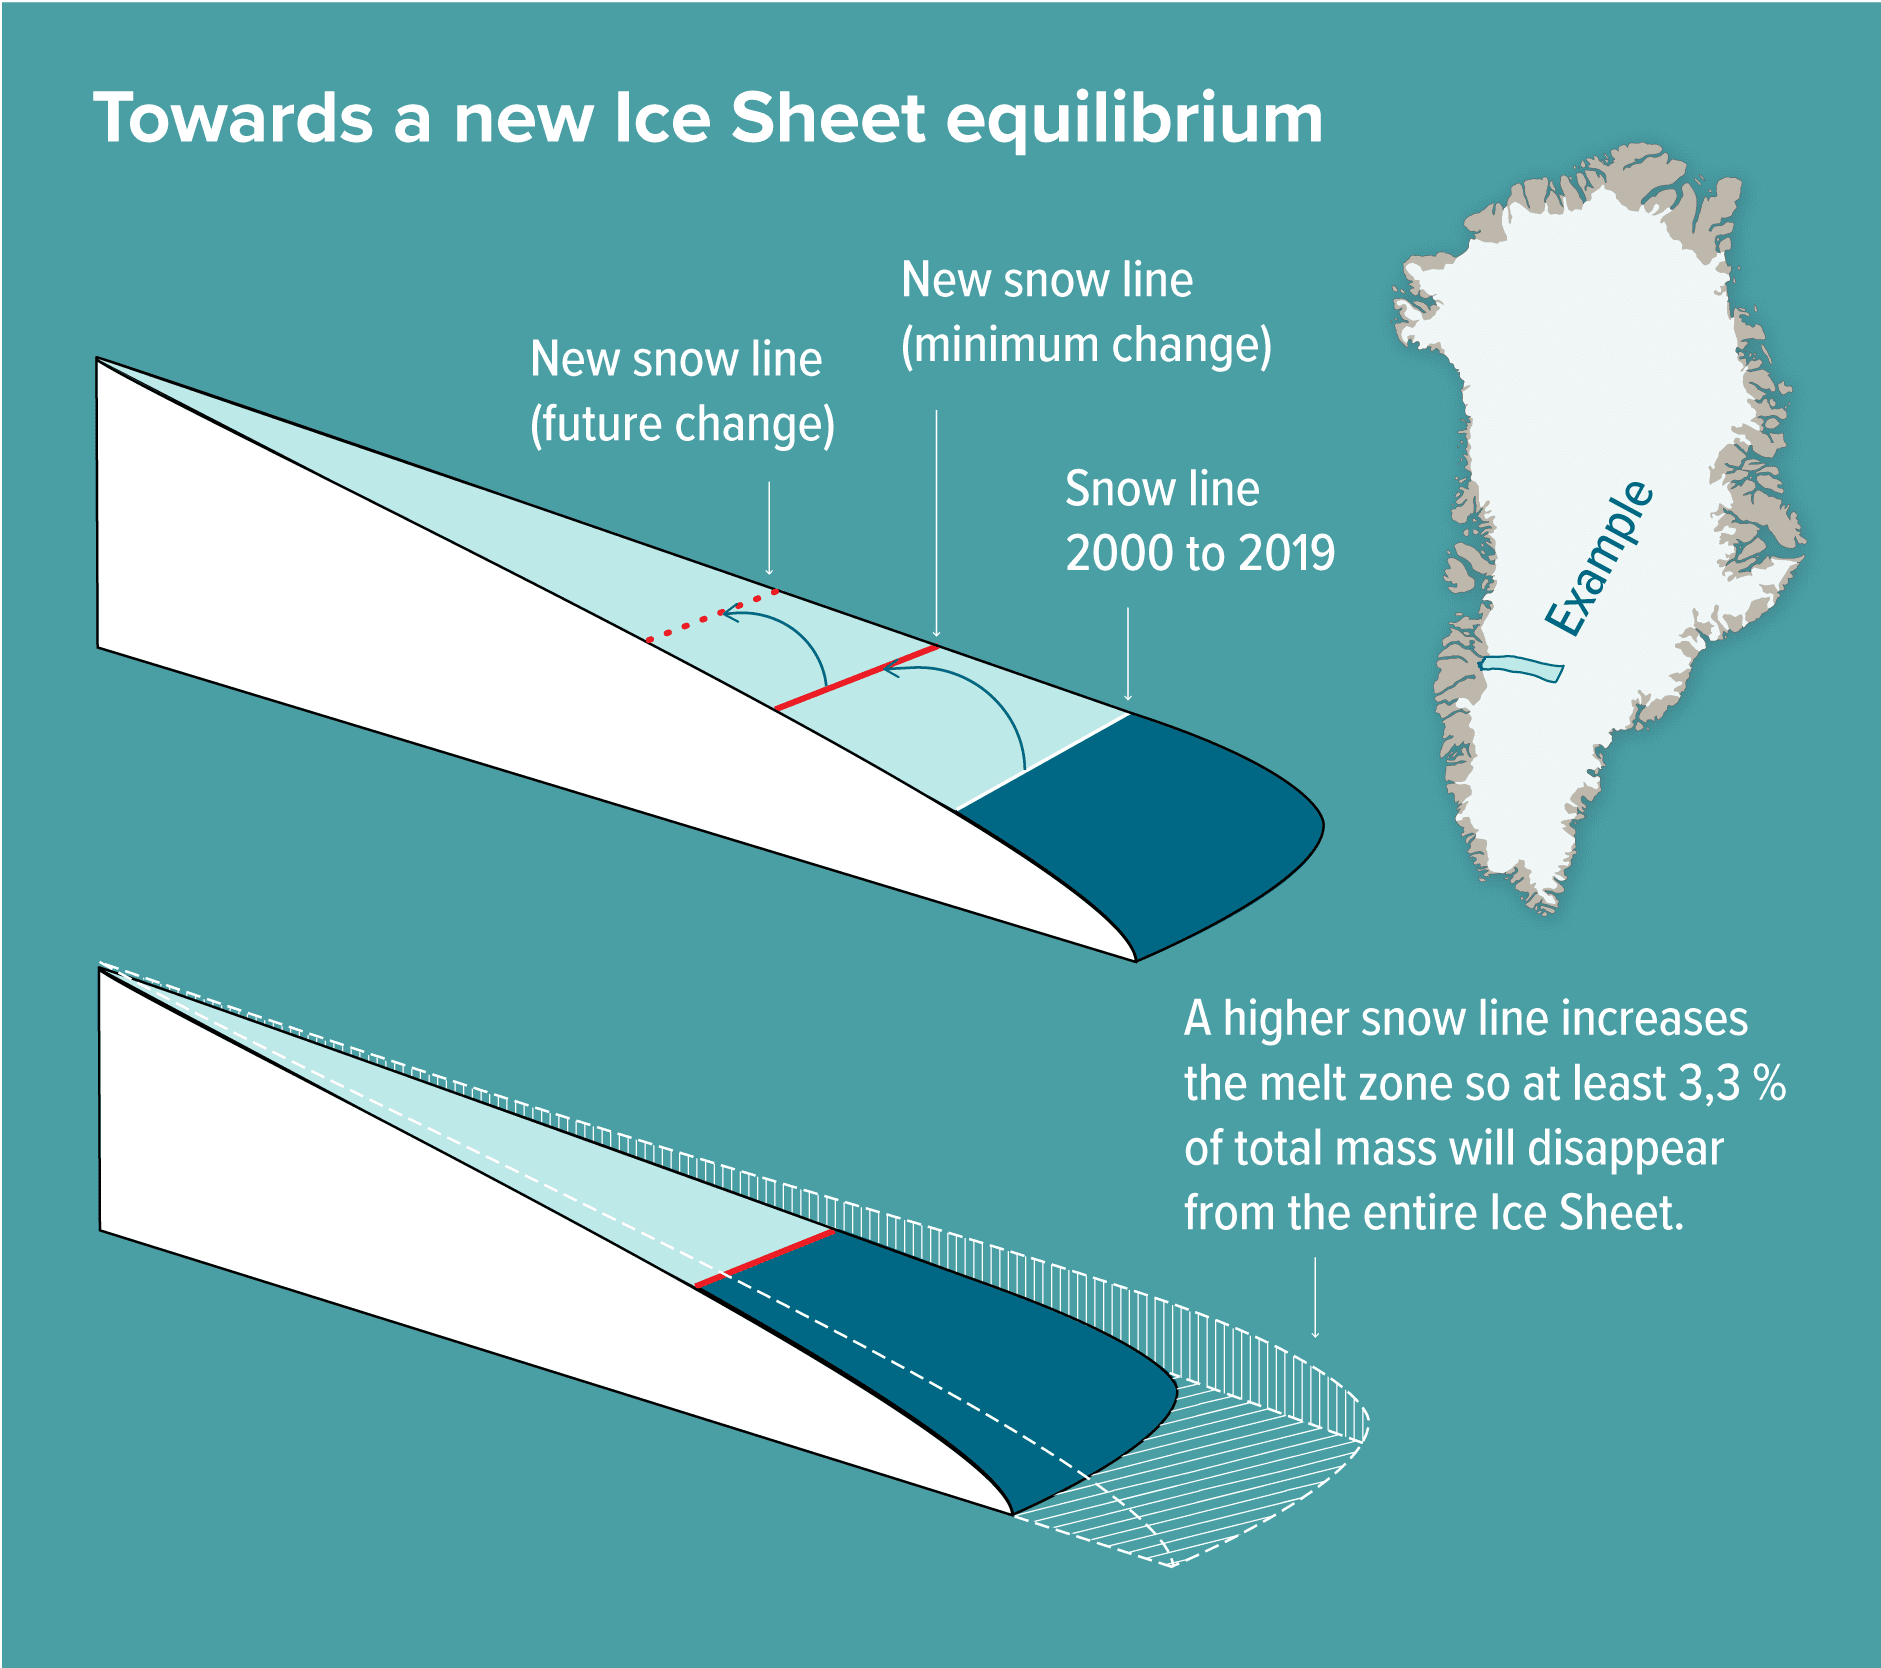 To determine the locked in Greenland ice melt the authors measured the snow line in sample areas and the line below which snow is already melting so that exposed ice will eventually be lost